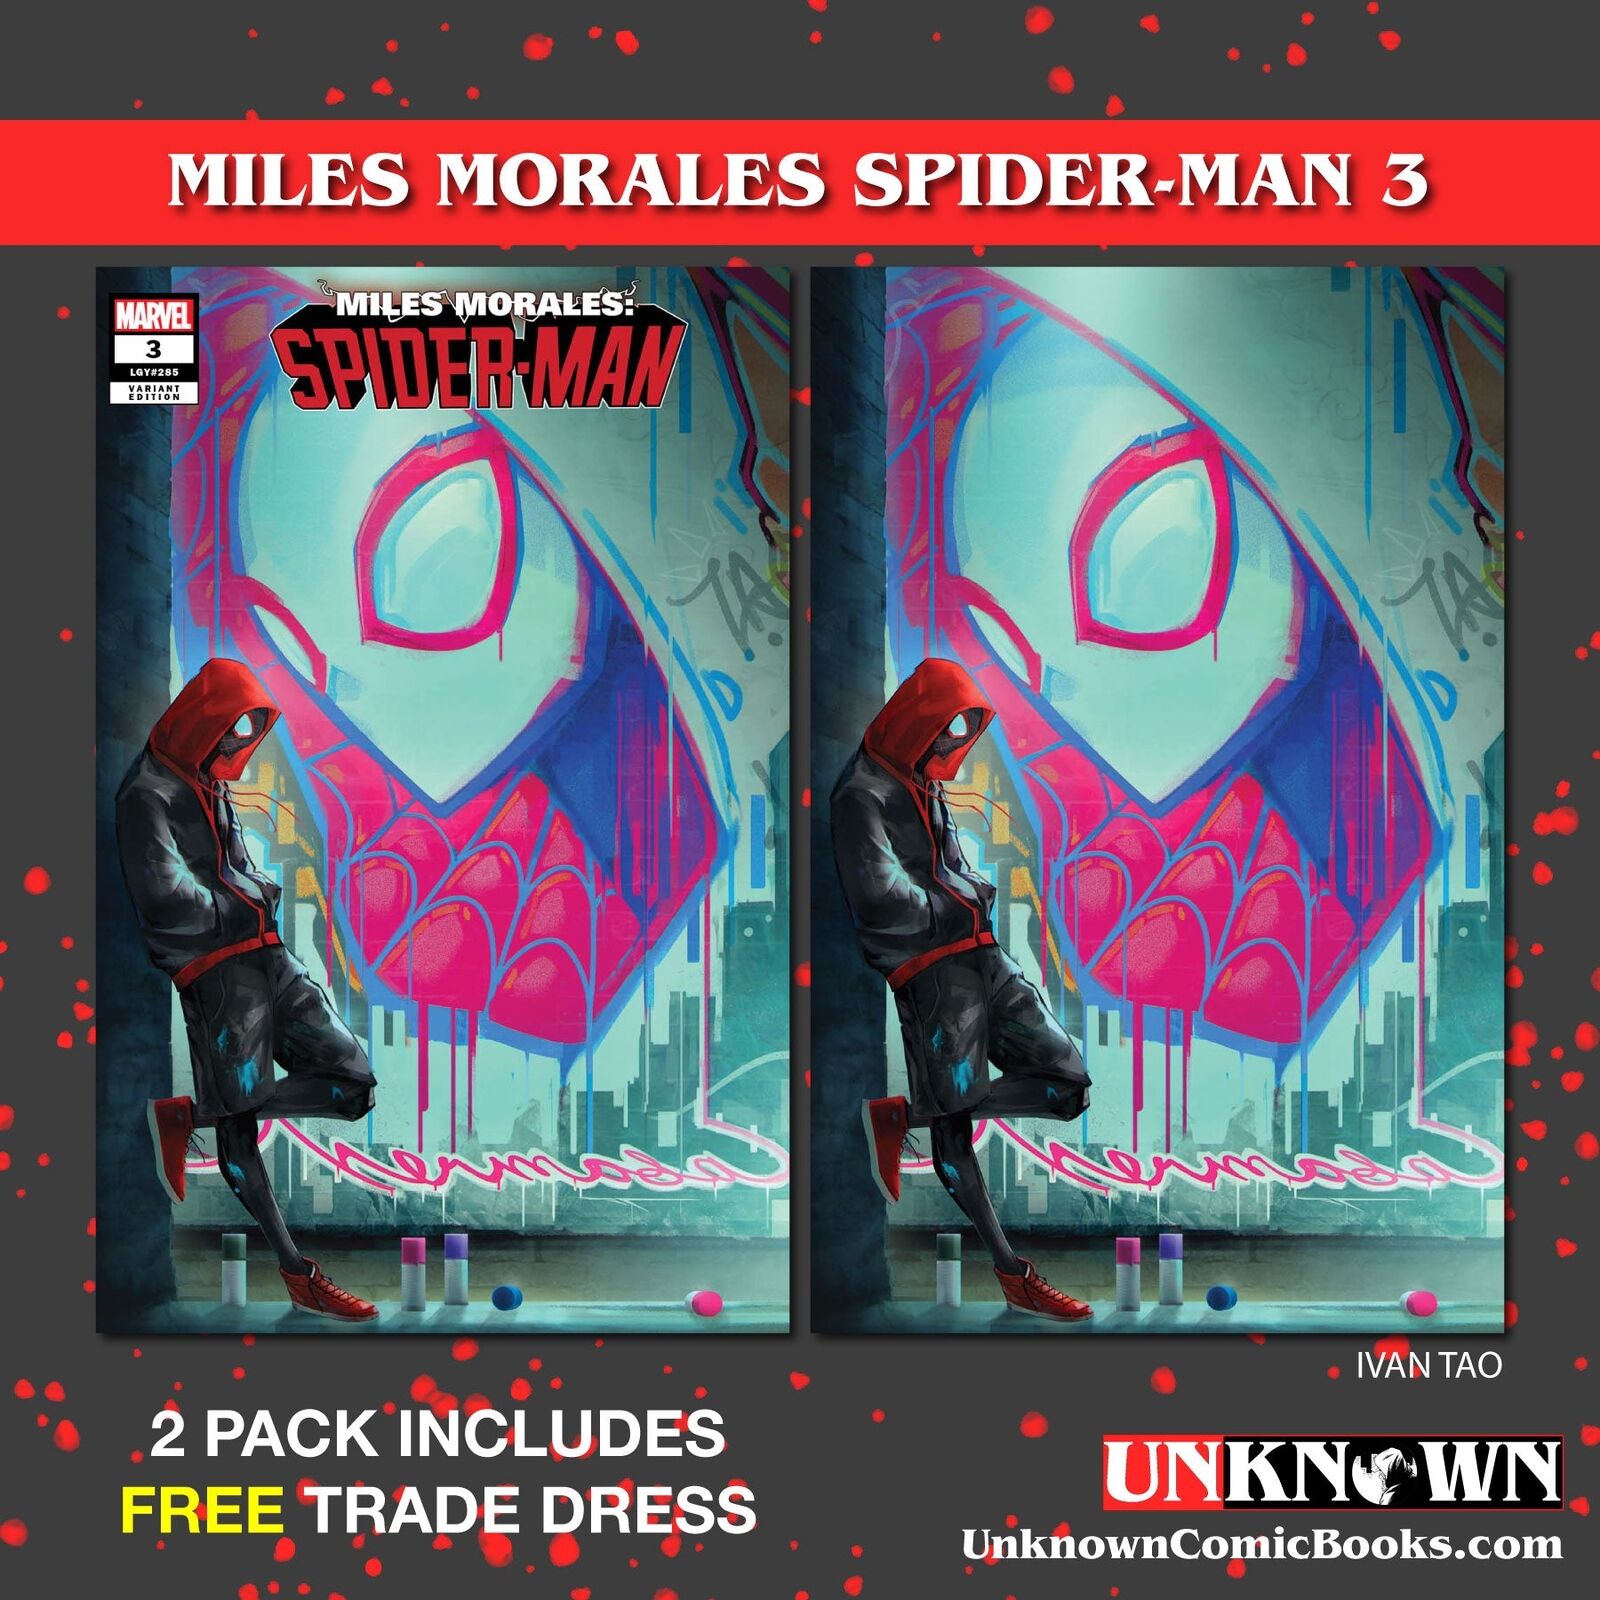 [2 PACK] **FREE TRADE DRESS** MILES MORALES: SPIDER-MAN #3 UNKNOWN COMICS IVAN T